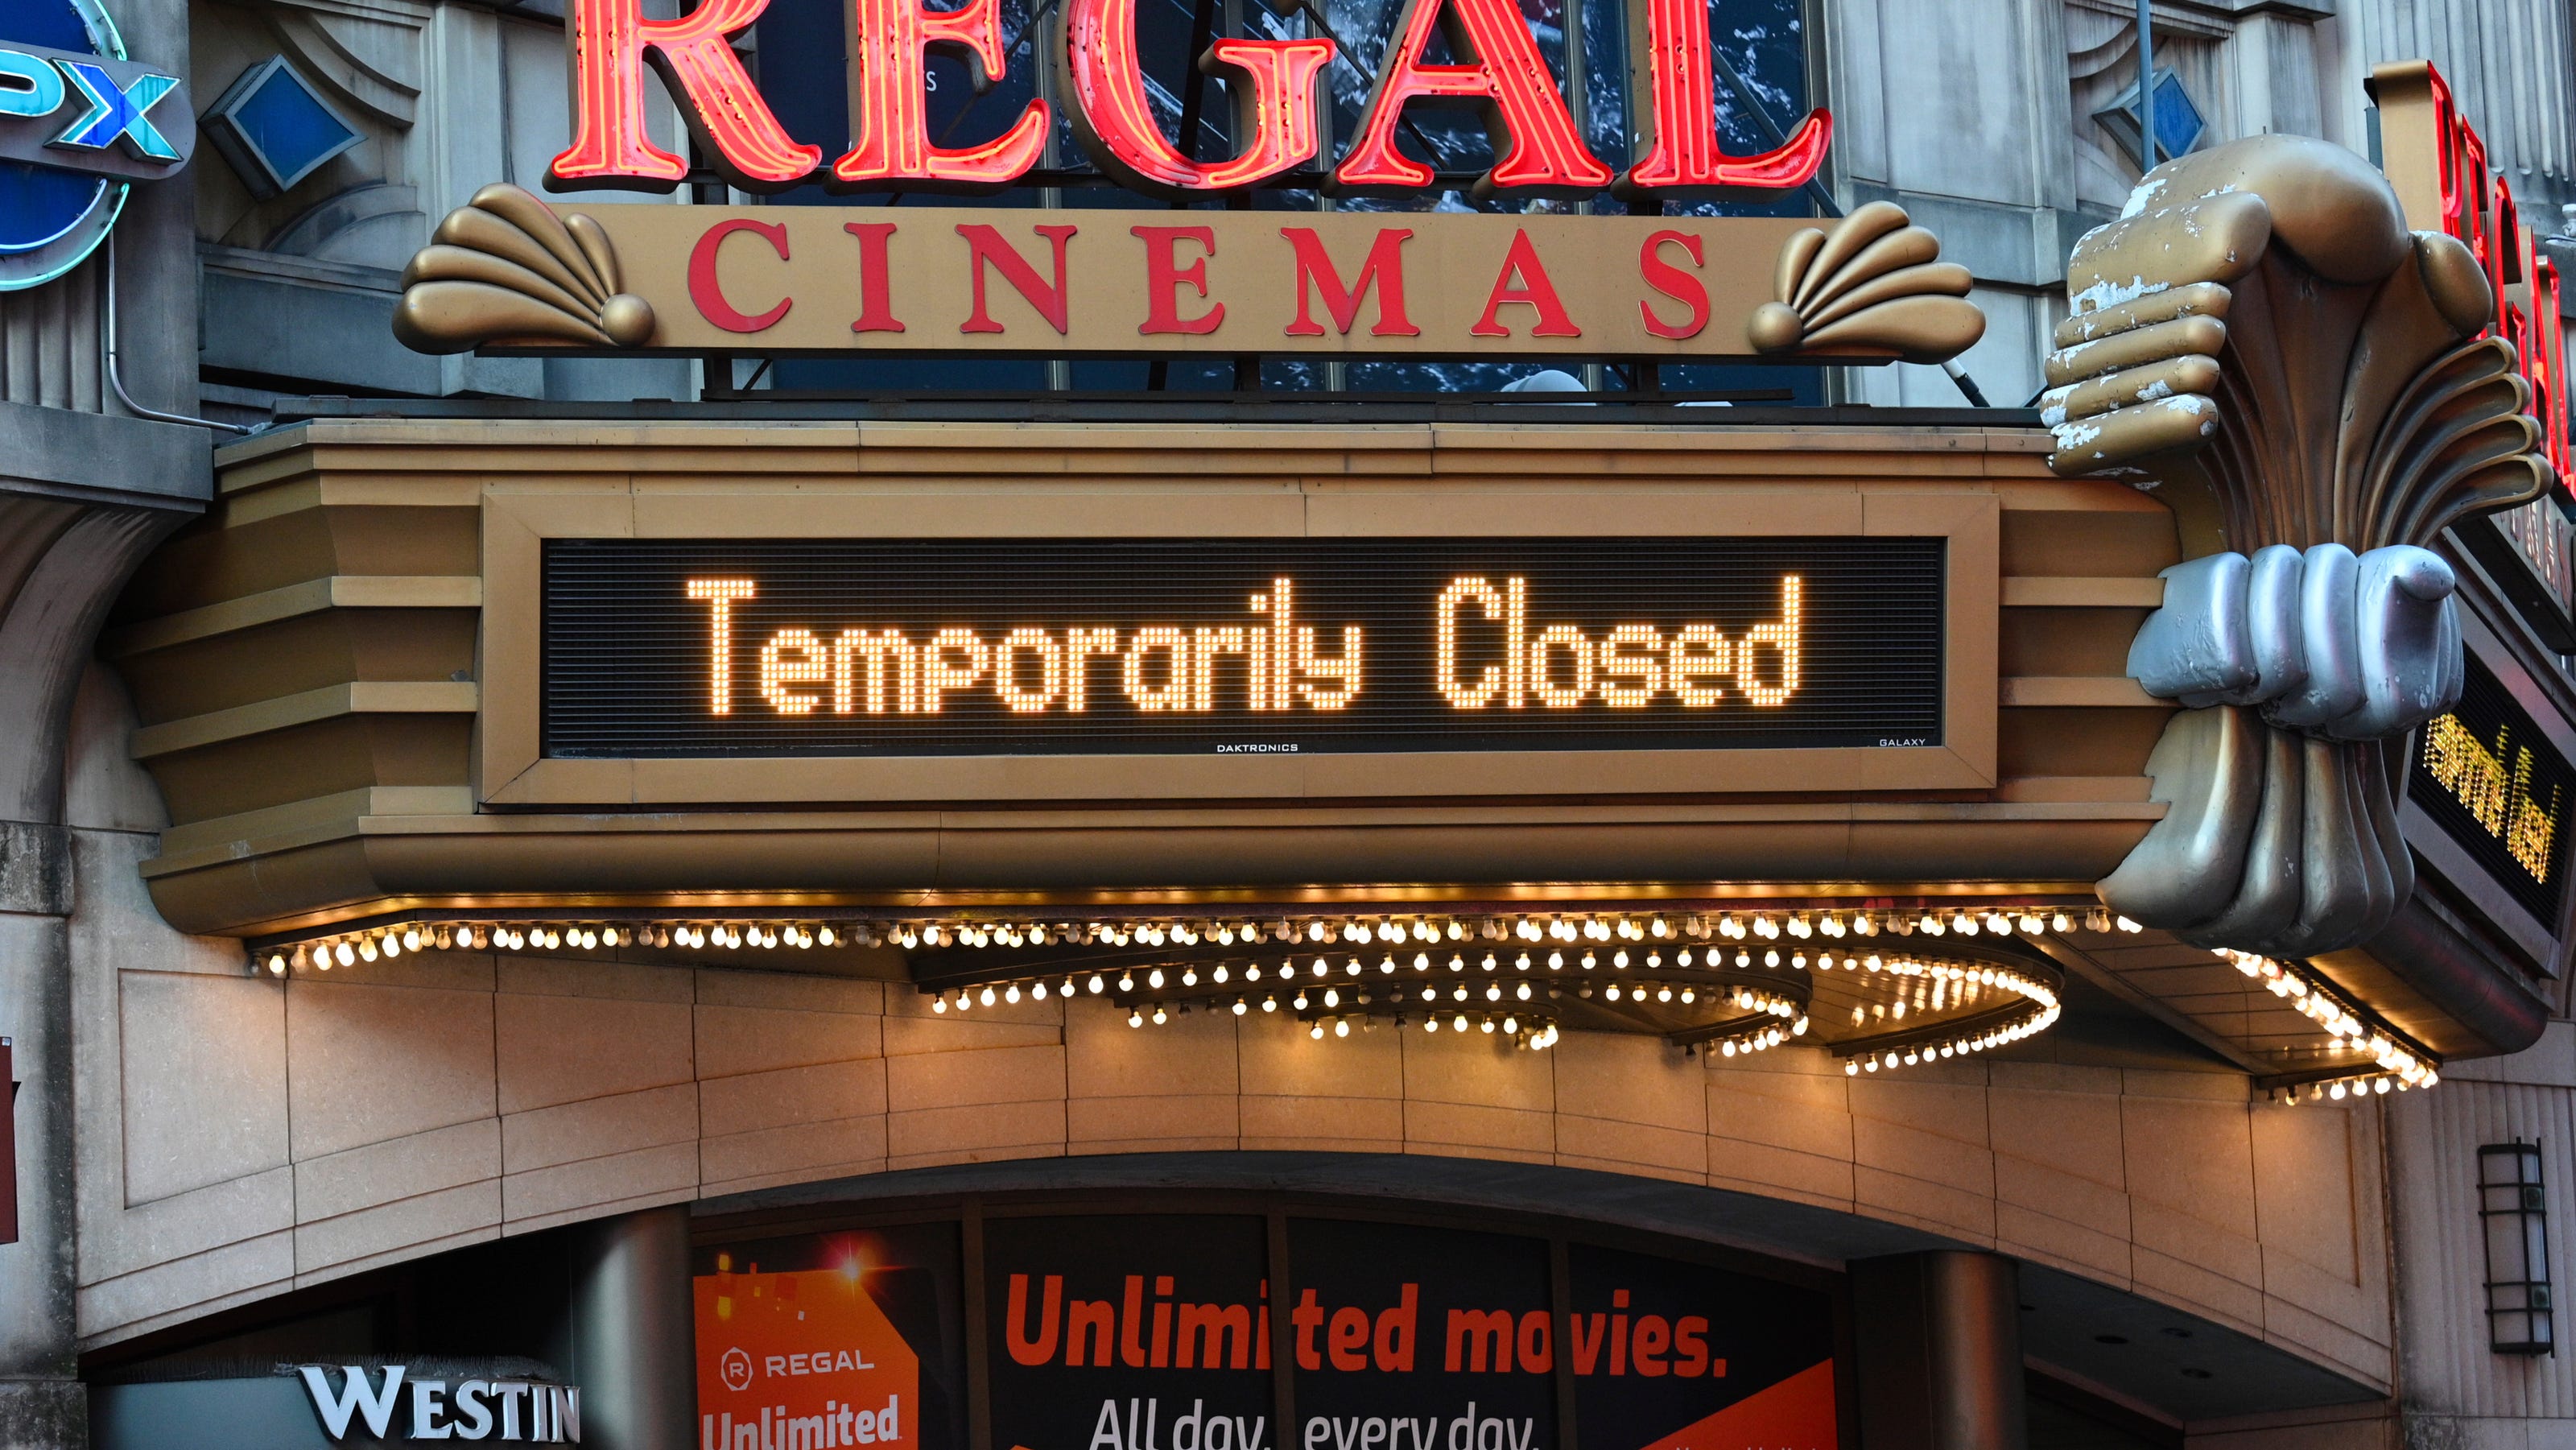 Regal Cinemas movie theaters reopen in April after closing amid COVID